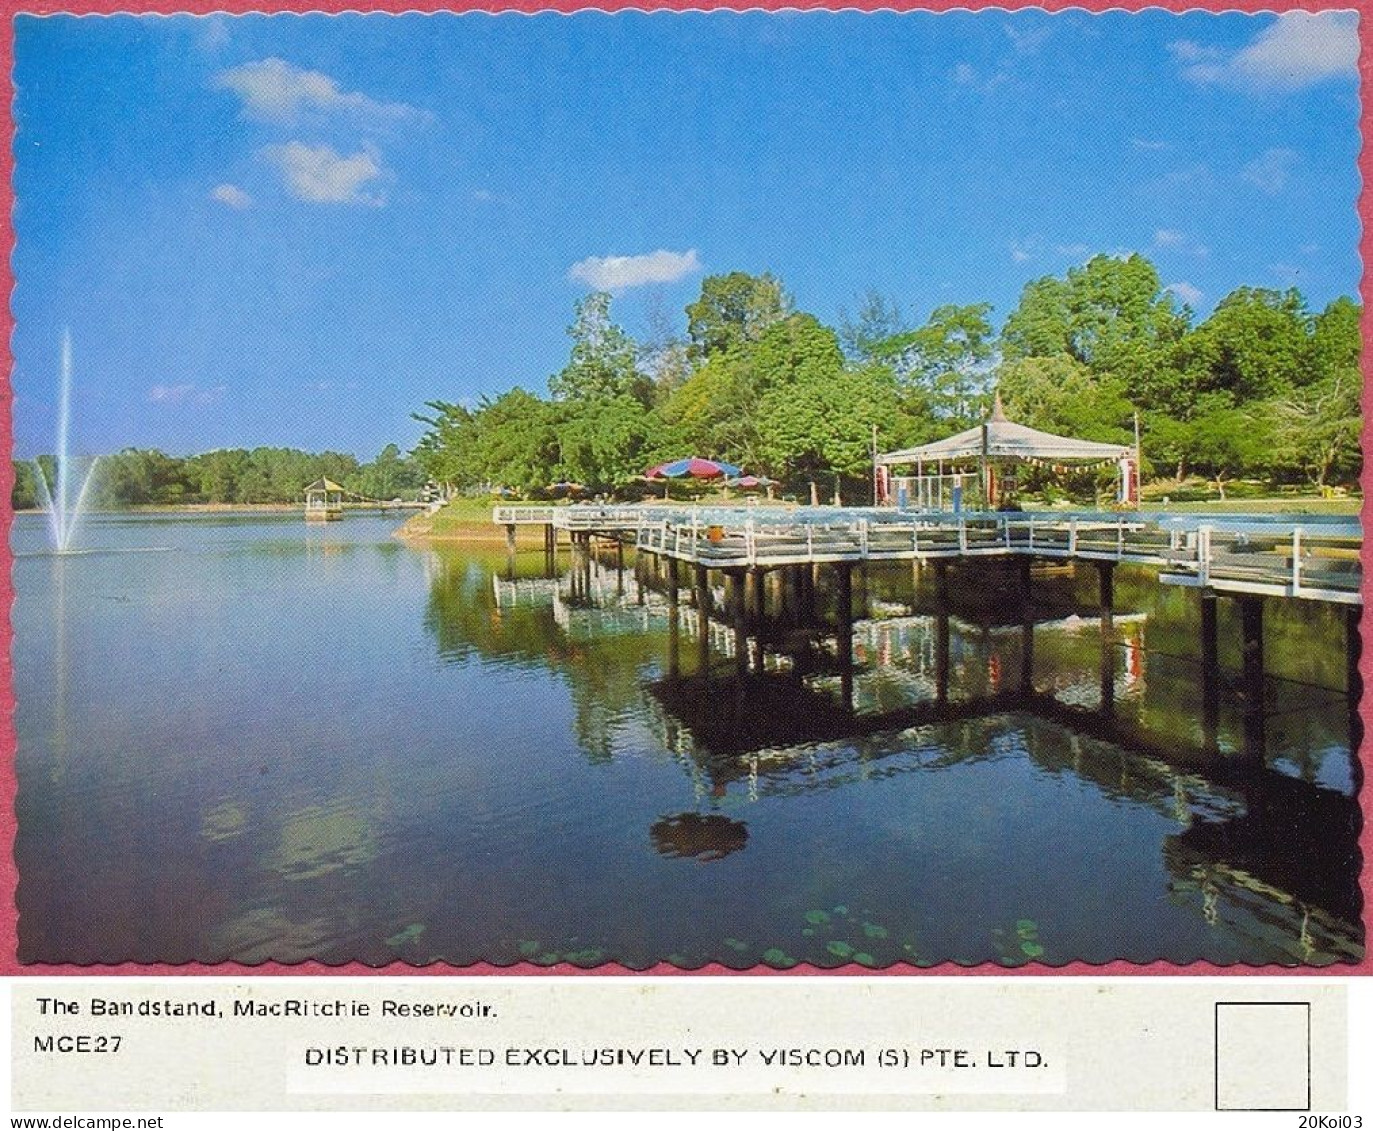 Singapore The Bandstand, MacRitchie Reservoir, 1978's MCE27 DISTRIBUTED EXCLUSIVELY BY VISCOM (S) PTE. LTD._cpc - Singapore